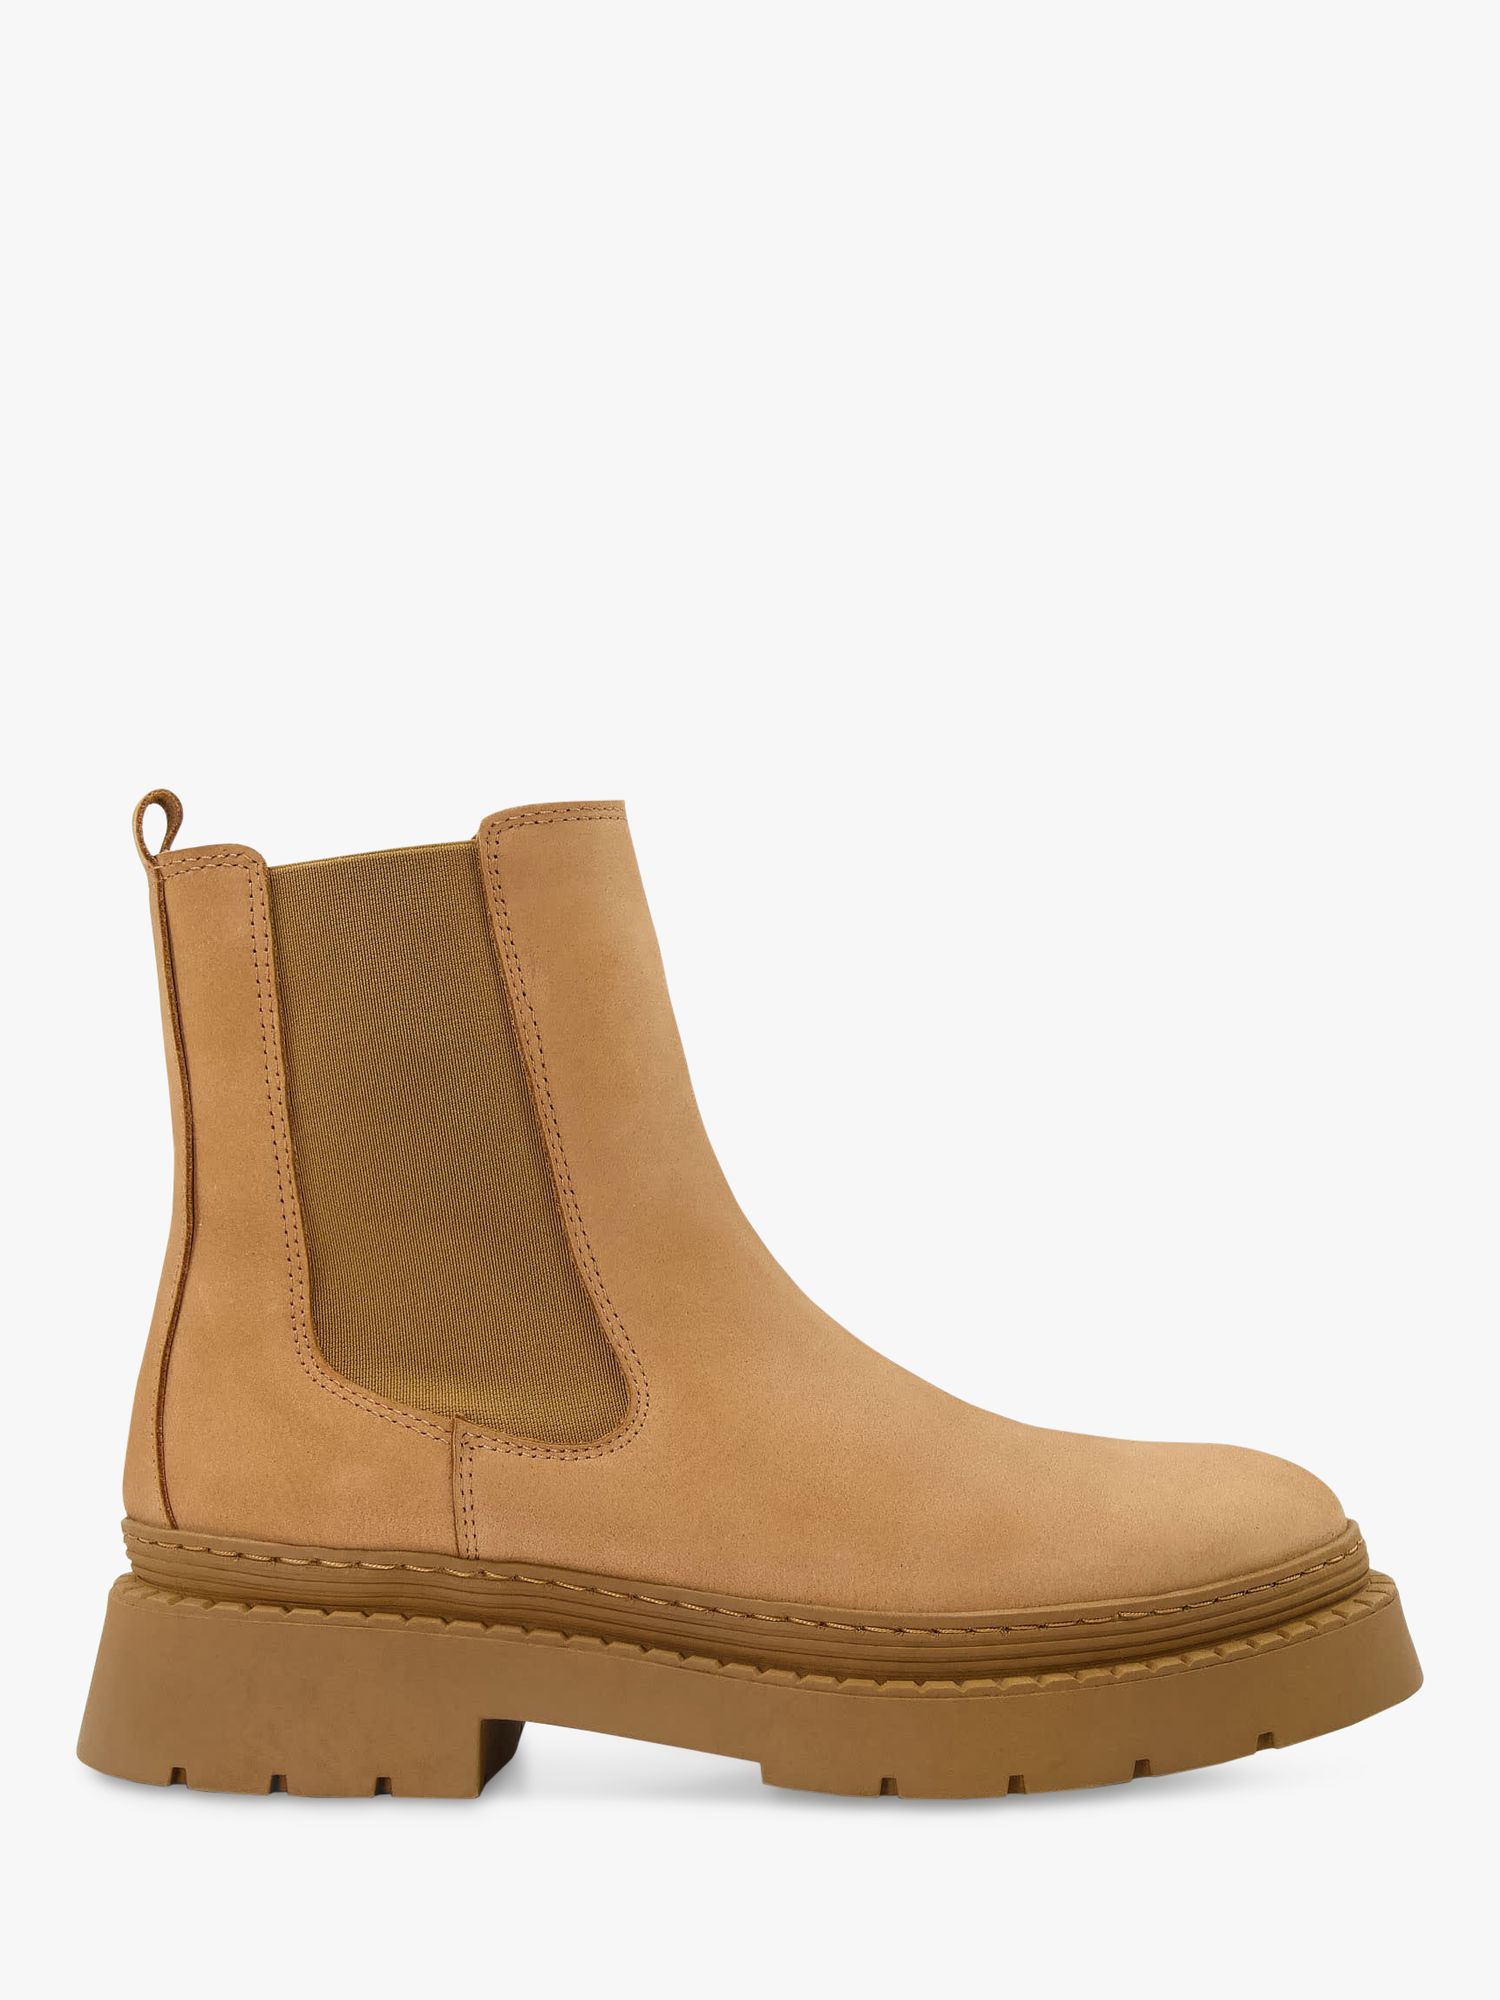 Dune Photograph Suede Ankle Boots, Camel, 8